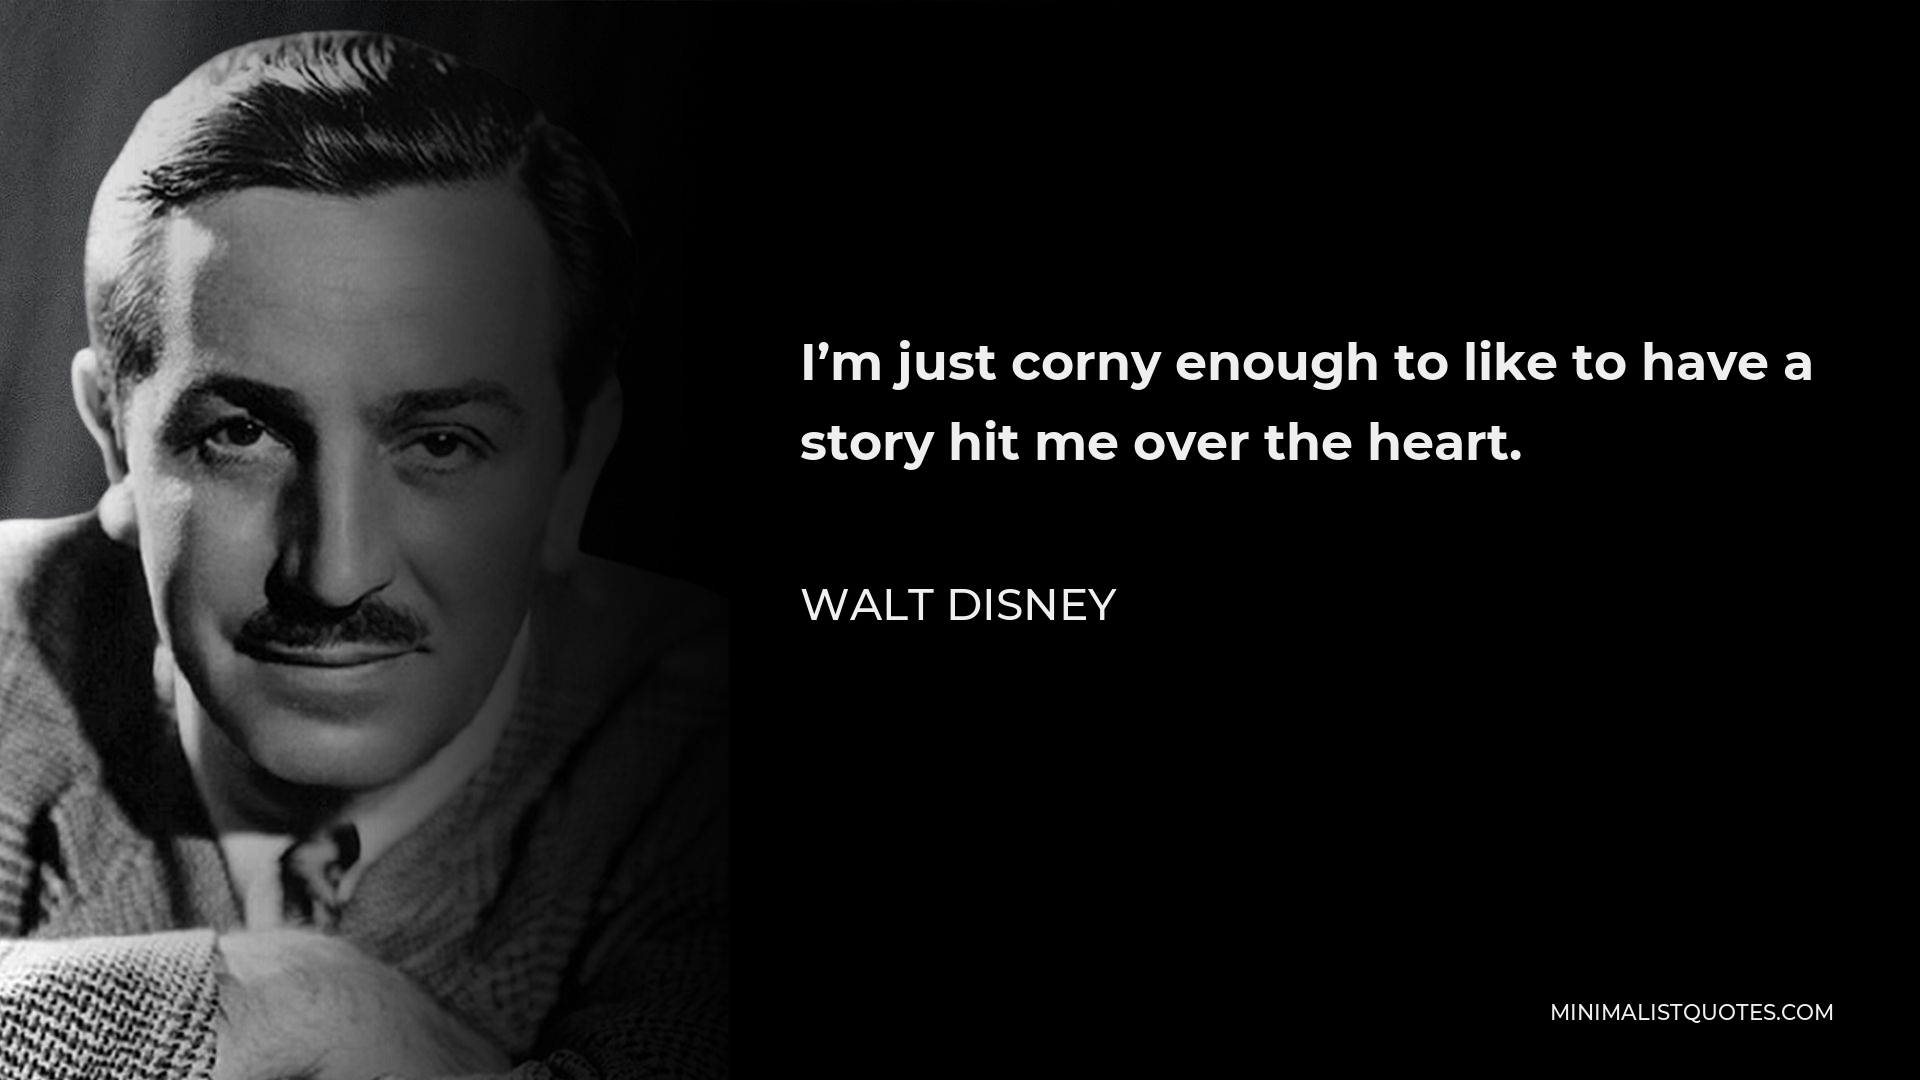 Walt Disney Quote - I’m just corny enough to like to have a story hit me over the heart.